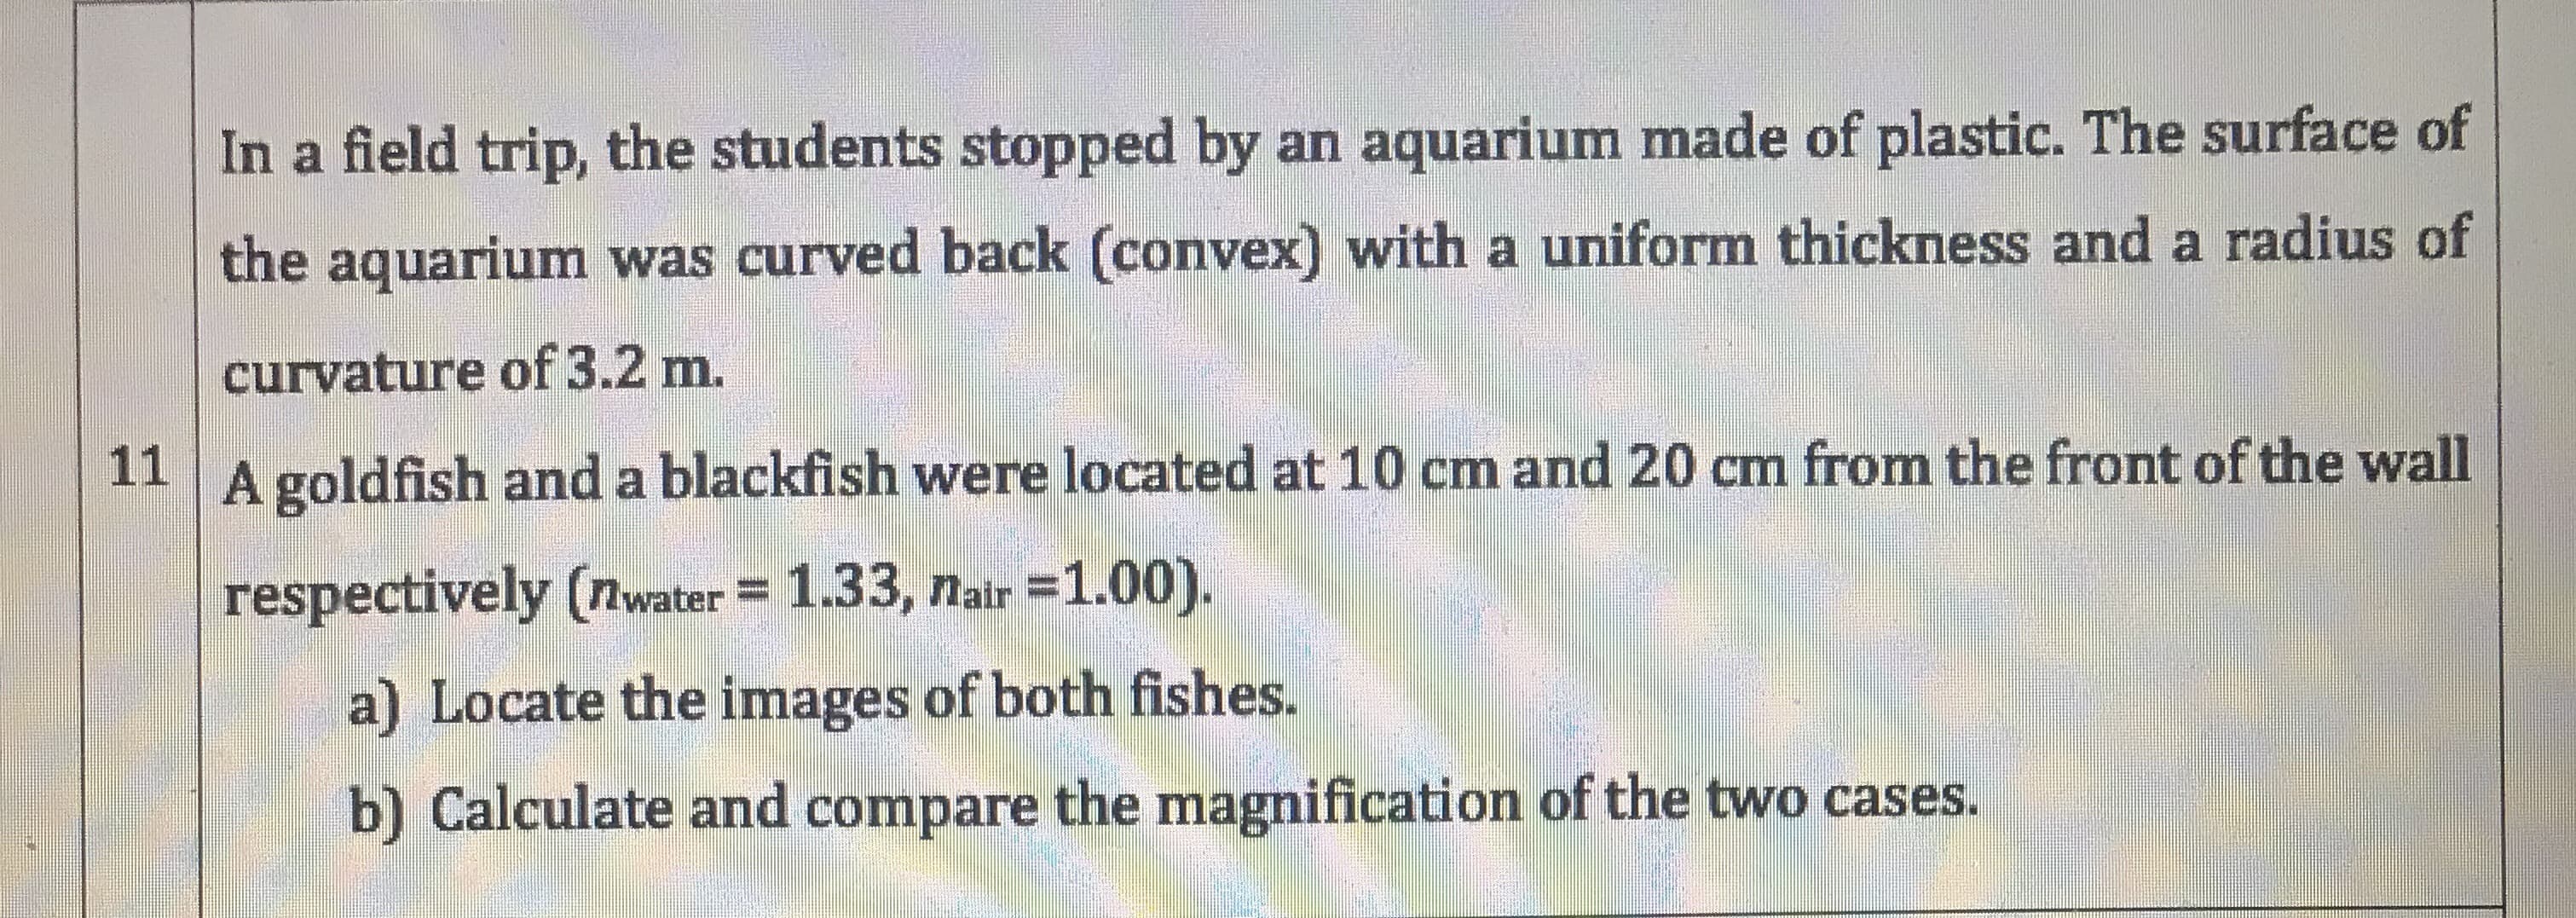 In a field trip, the students stopped by an aquarium made of plastic. The surface of
the aquarium was curved back (convex) with a uniform thickness and a radius of
curvature of 3.2 m.
11
A goldfish and a blackfish were located at 10 cm and 20 cm from the front of the wall
respectively (nwater = 1.33, nair =1.00).
a) Locate the images of both fishes.
b) Calculate and compare the magnification of the two cases.
